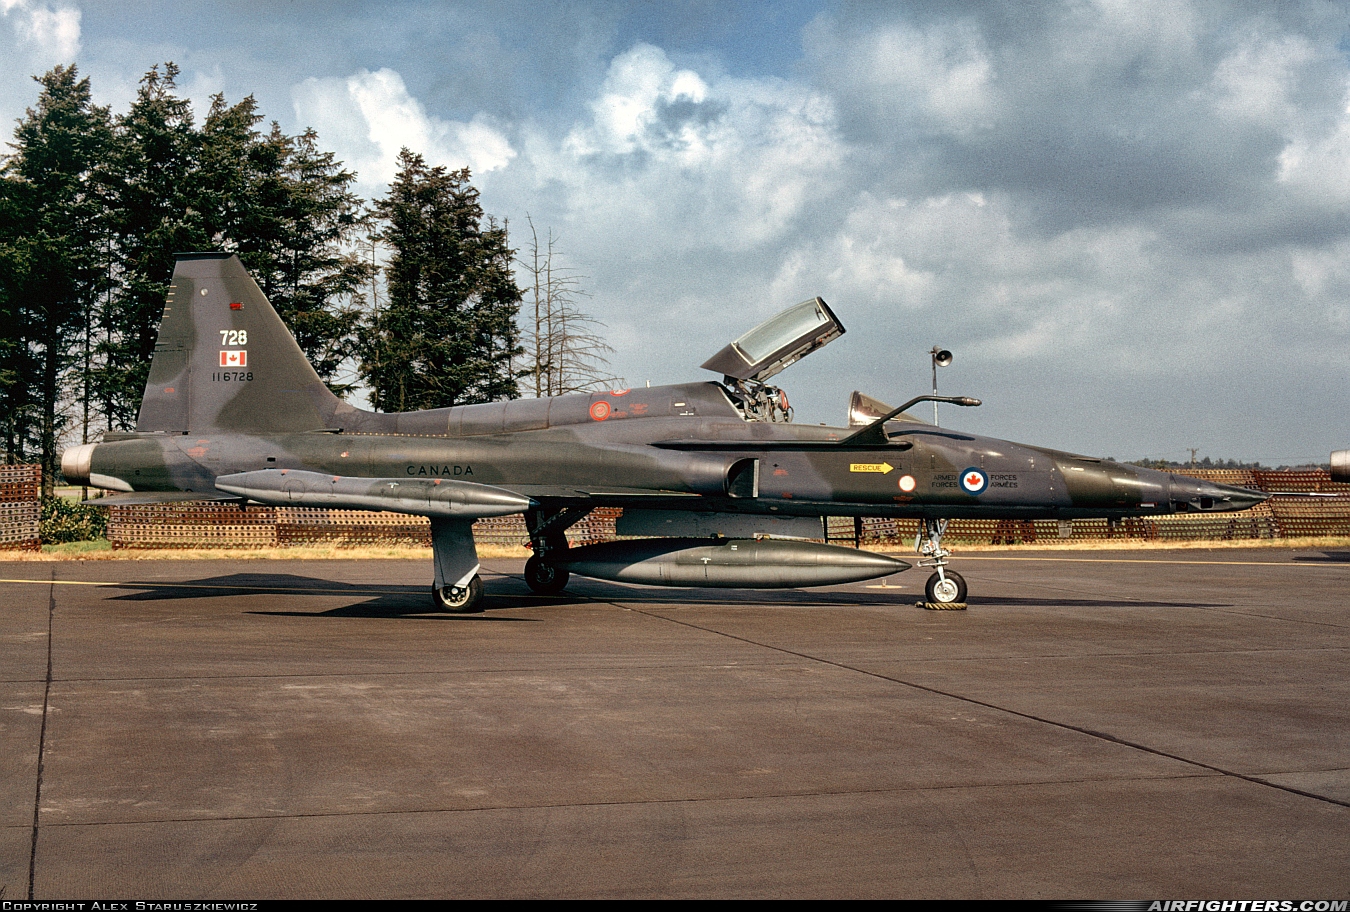 Canada - Air Force Canadair CF-5A (CL-219) 116728 at Leck (EDXK), Germany